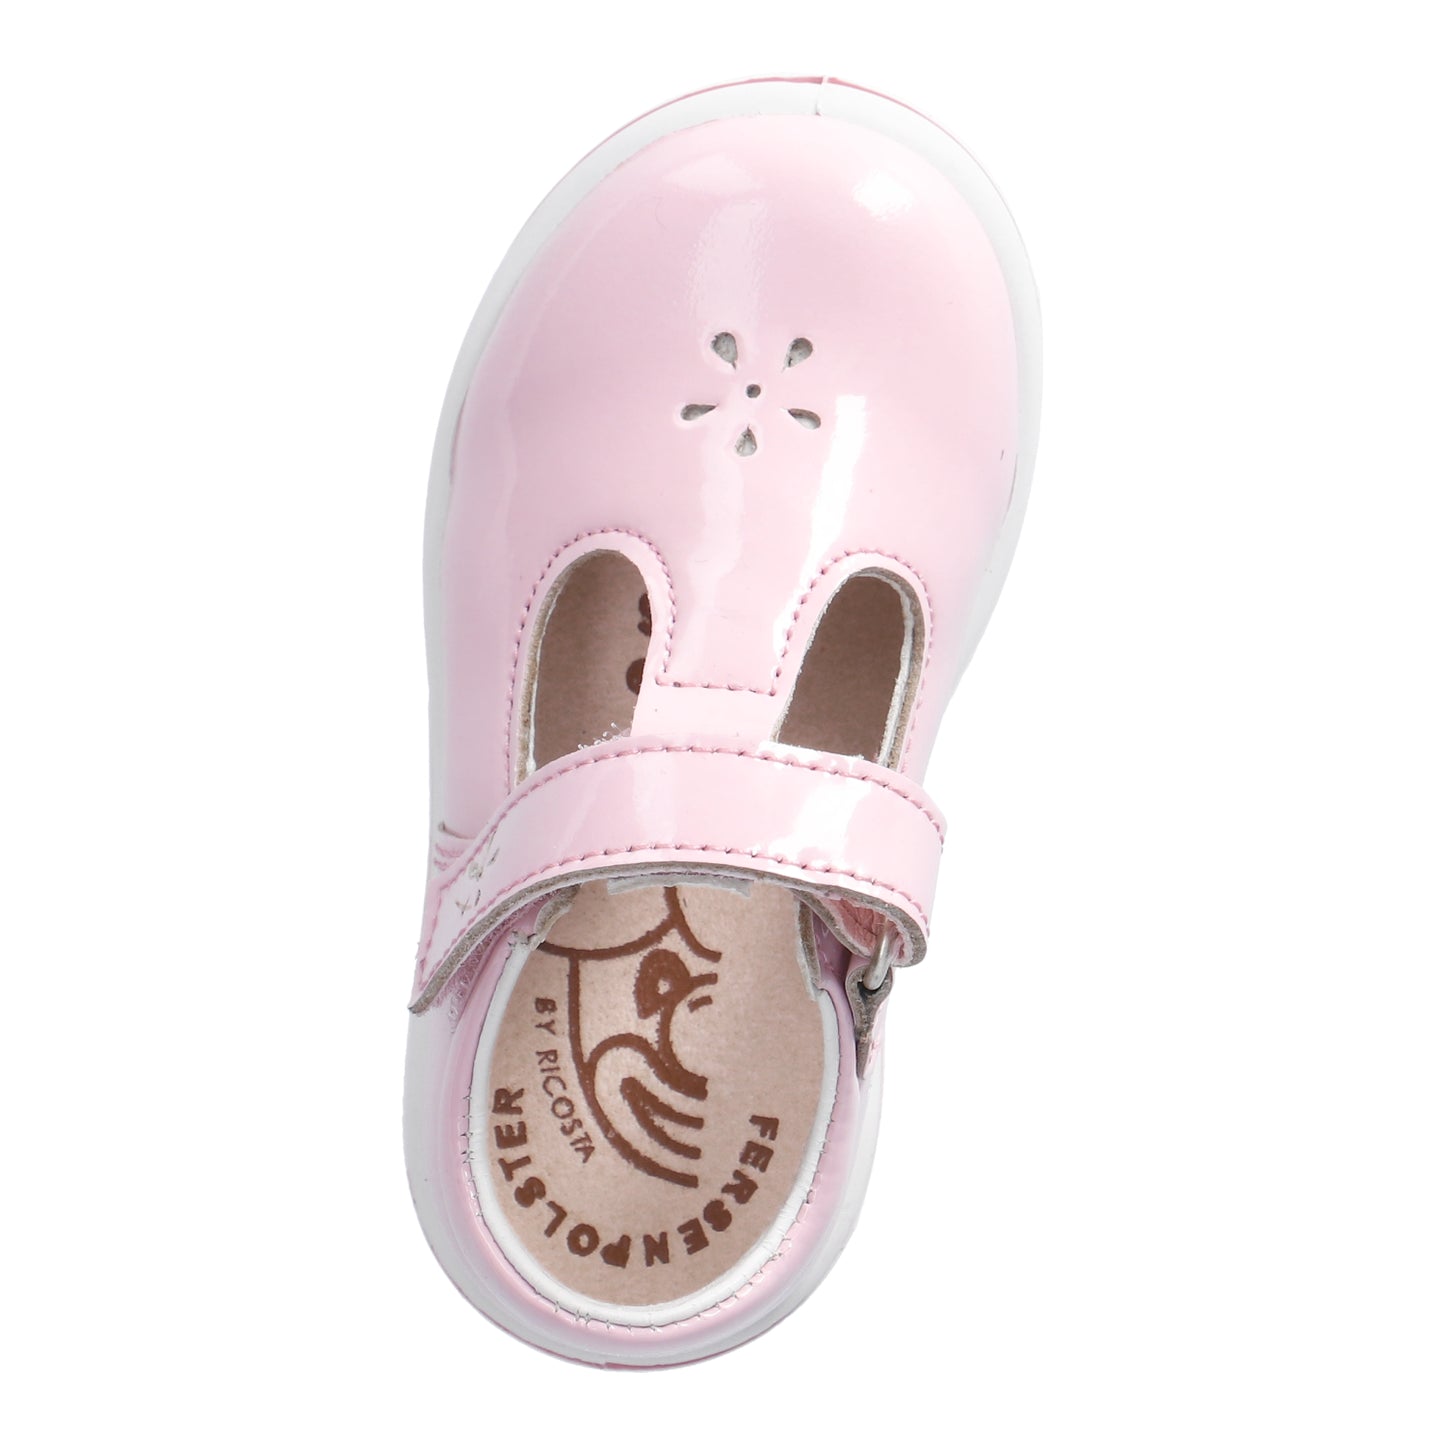 Winona T-Bar Girl's shoe in Blush Pink Patent